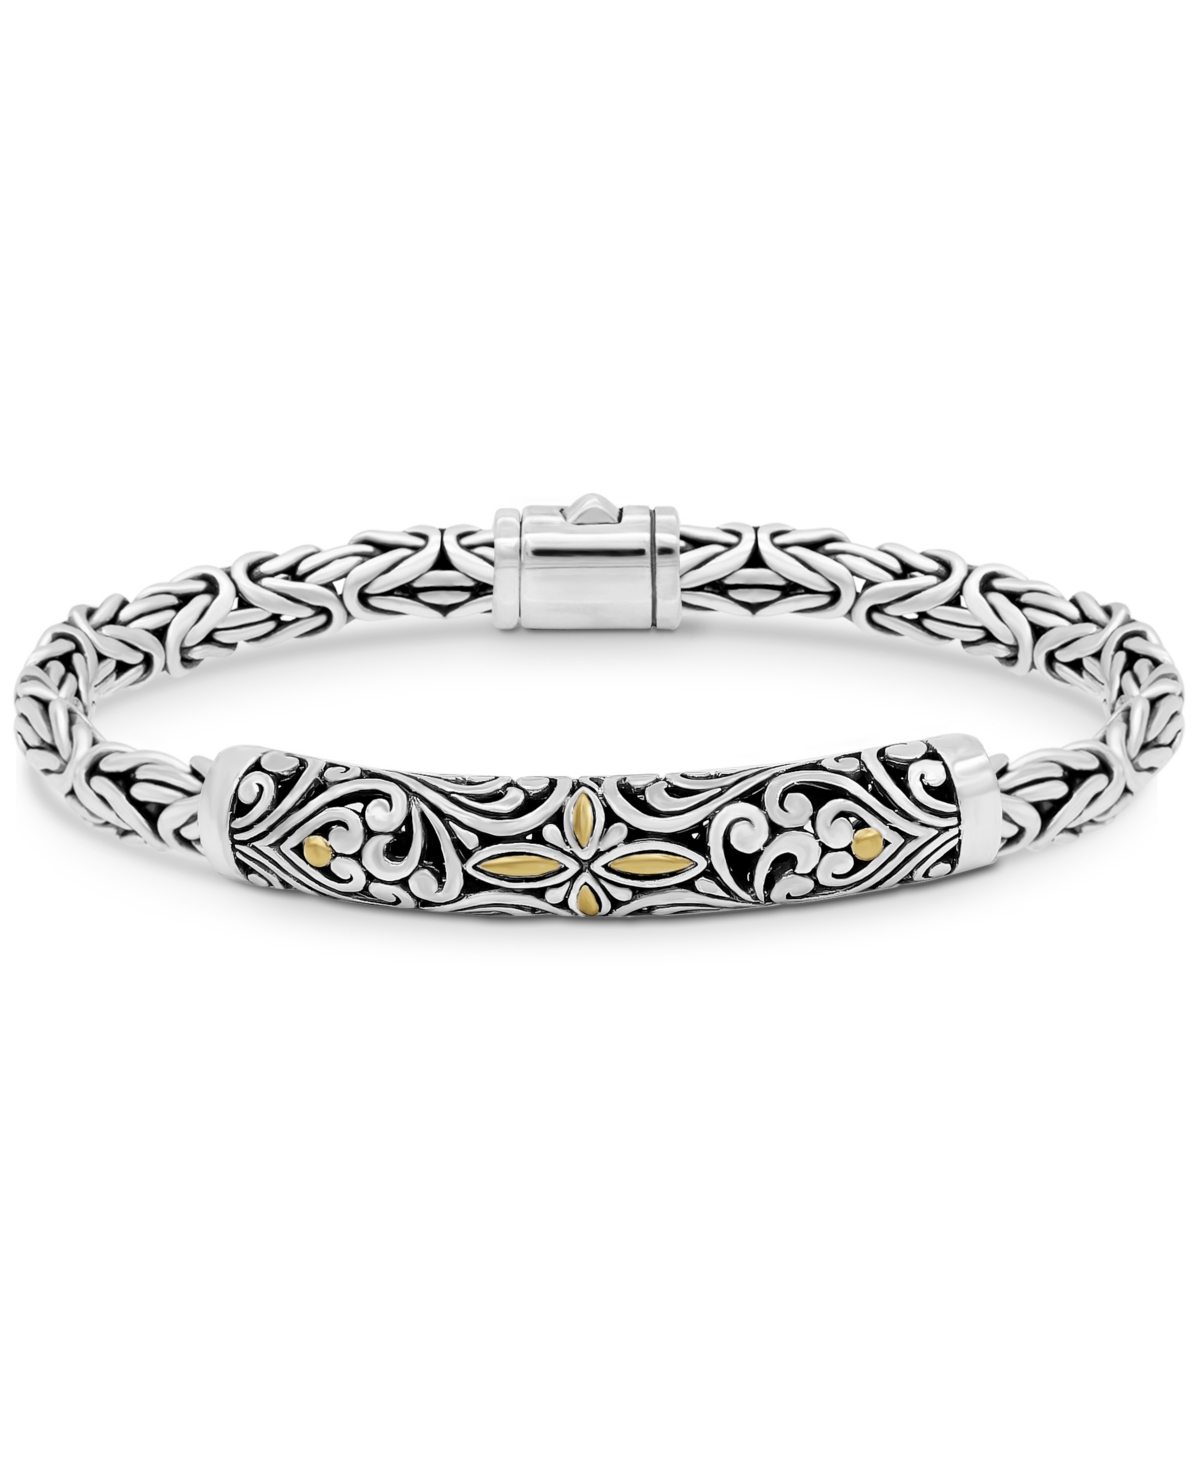 Bali Filigree with Borobudur Oval 5mm Chain Bracelet in Sterling Silver and 18K Gold - Silver